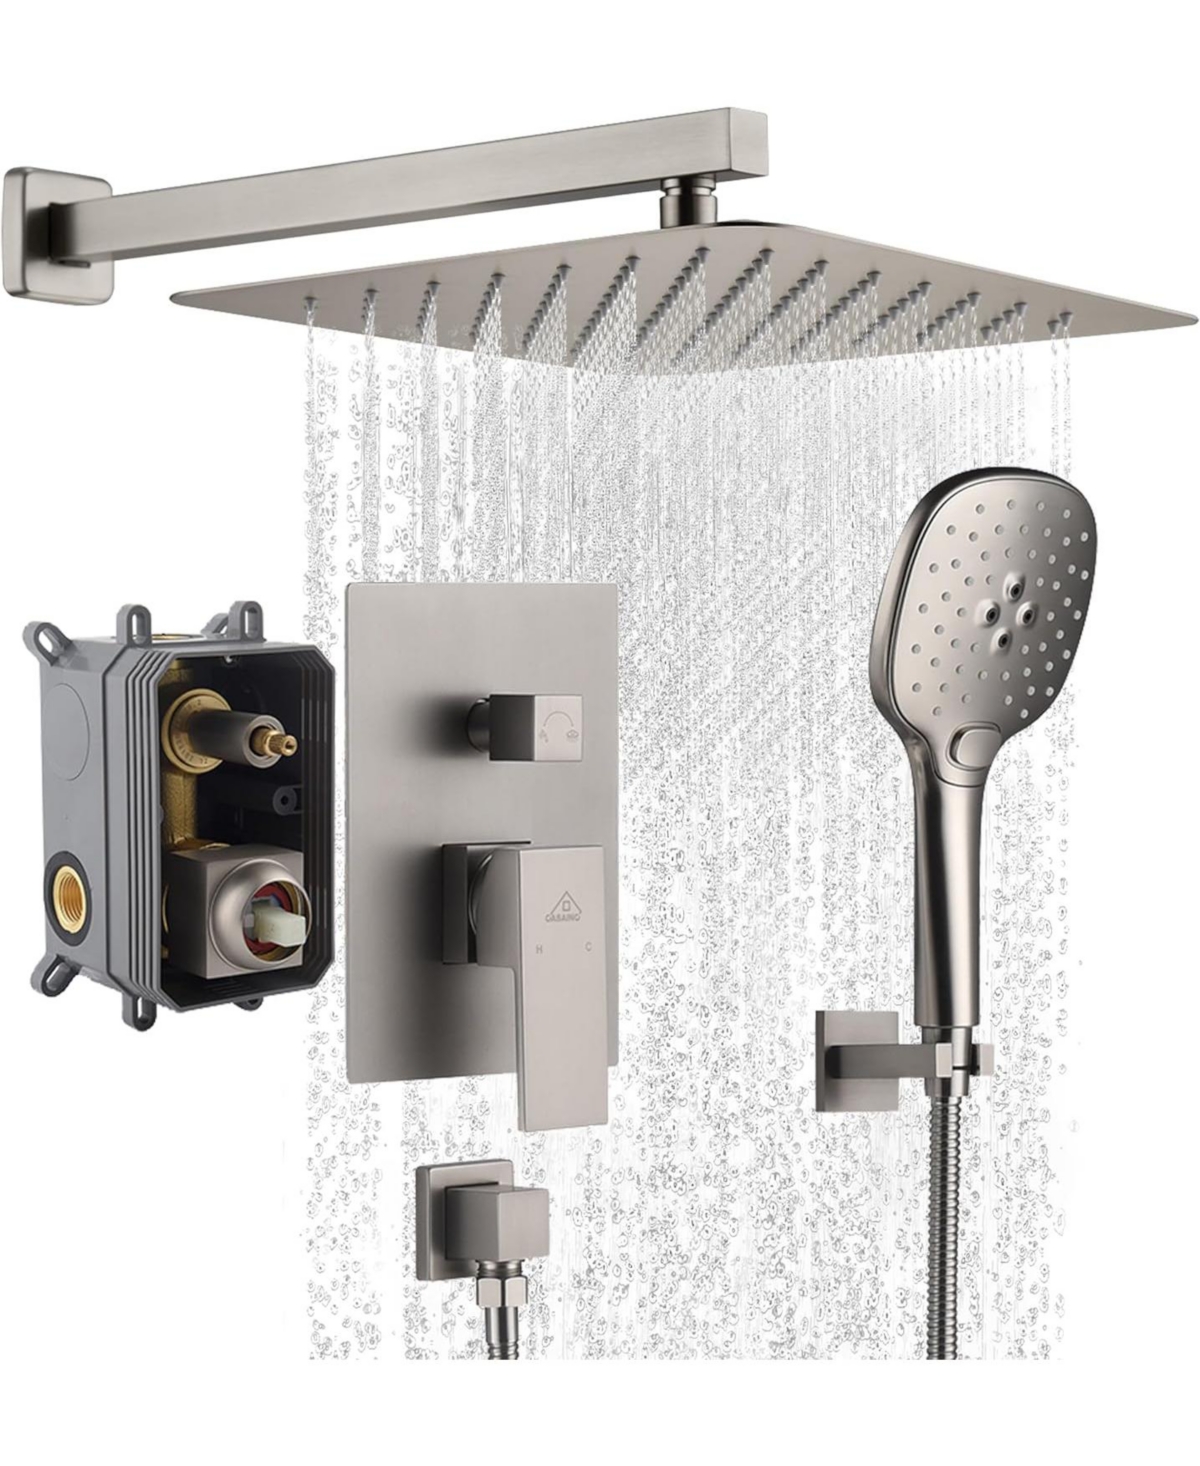 10 Inch Wall Mounted Rainfall Shower Set with 3-Spray Handheld Shower System - Brushed nickel